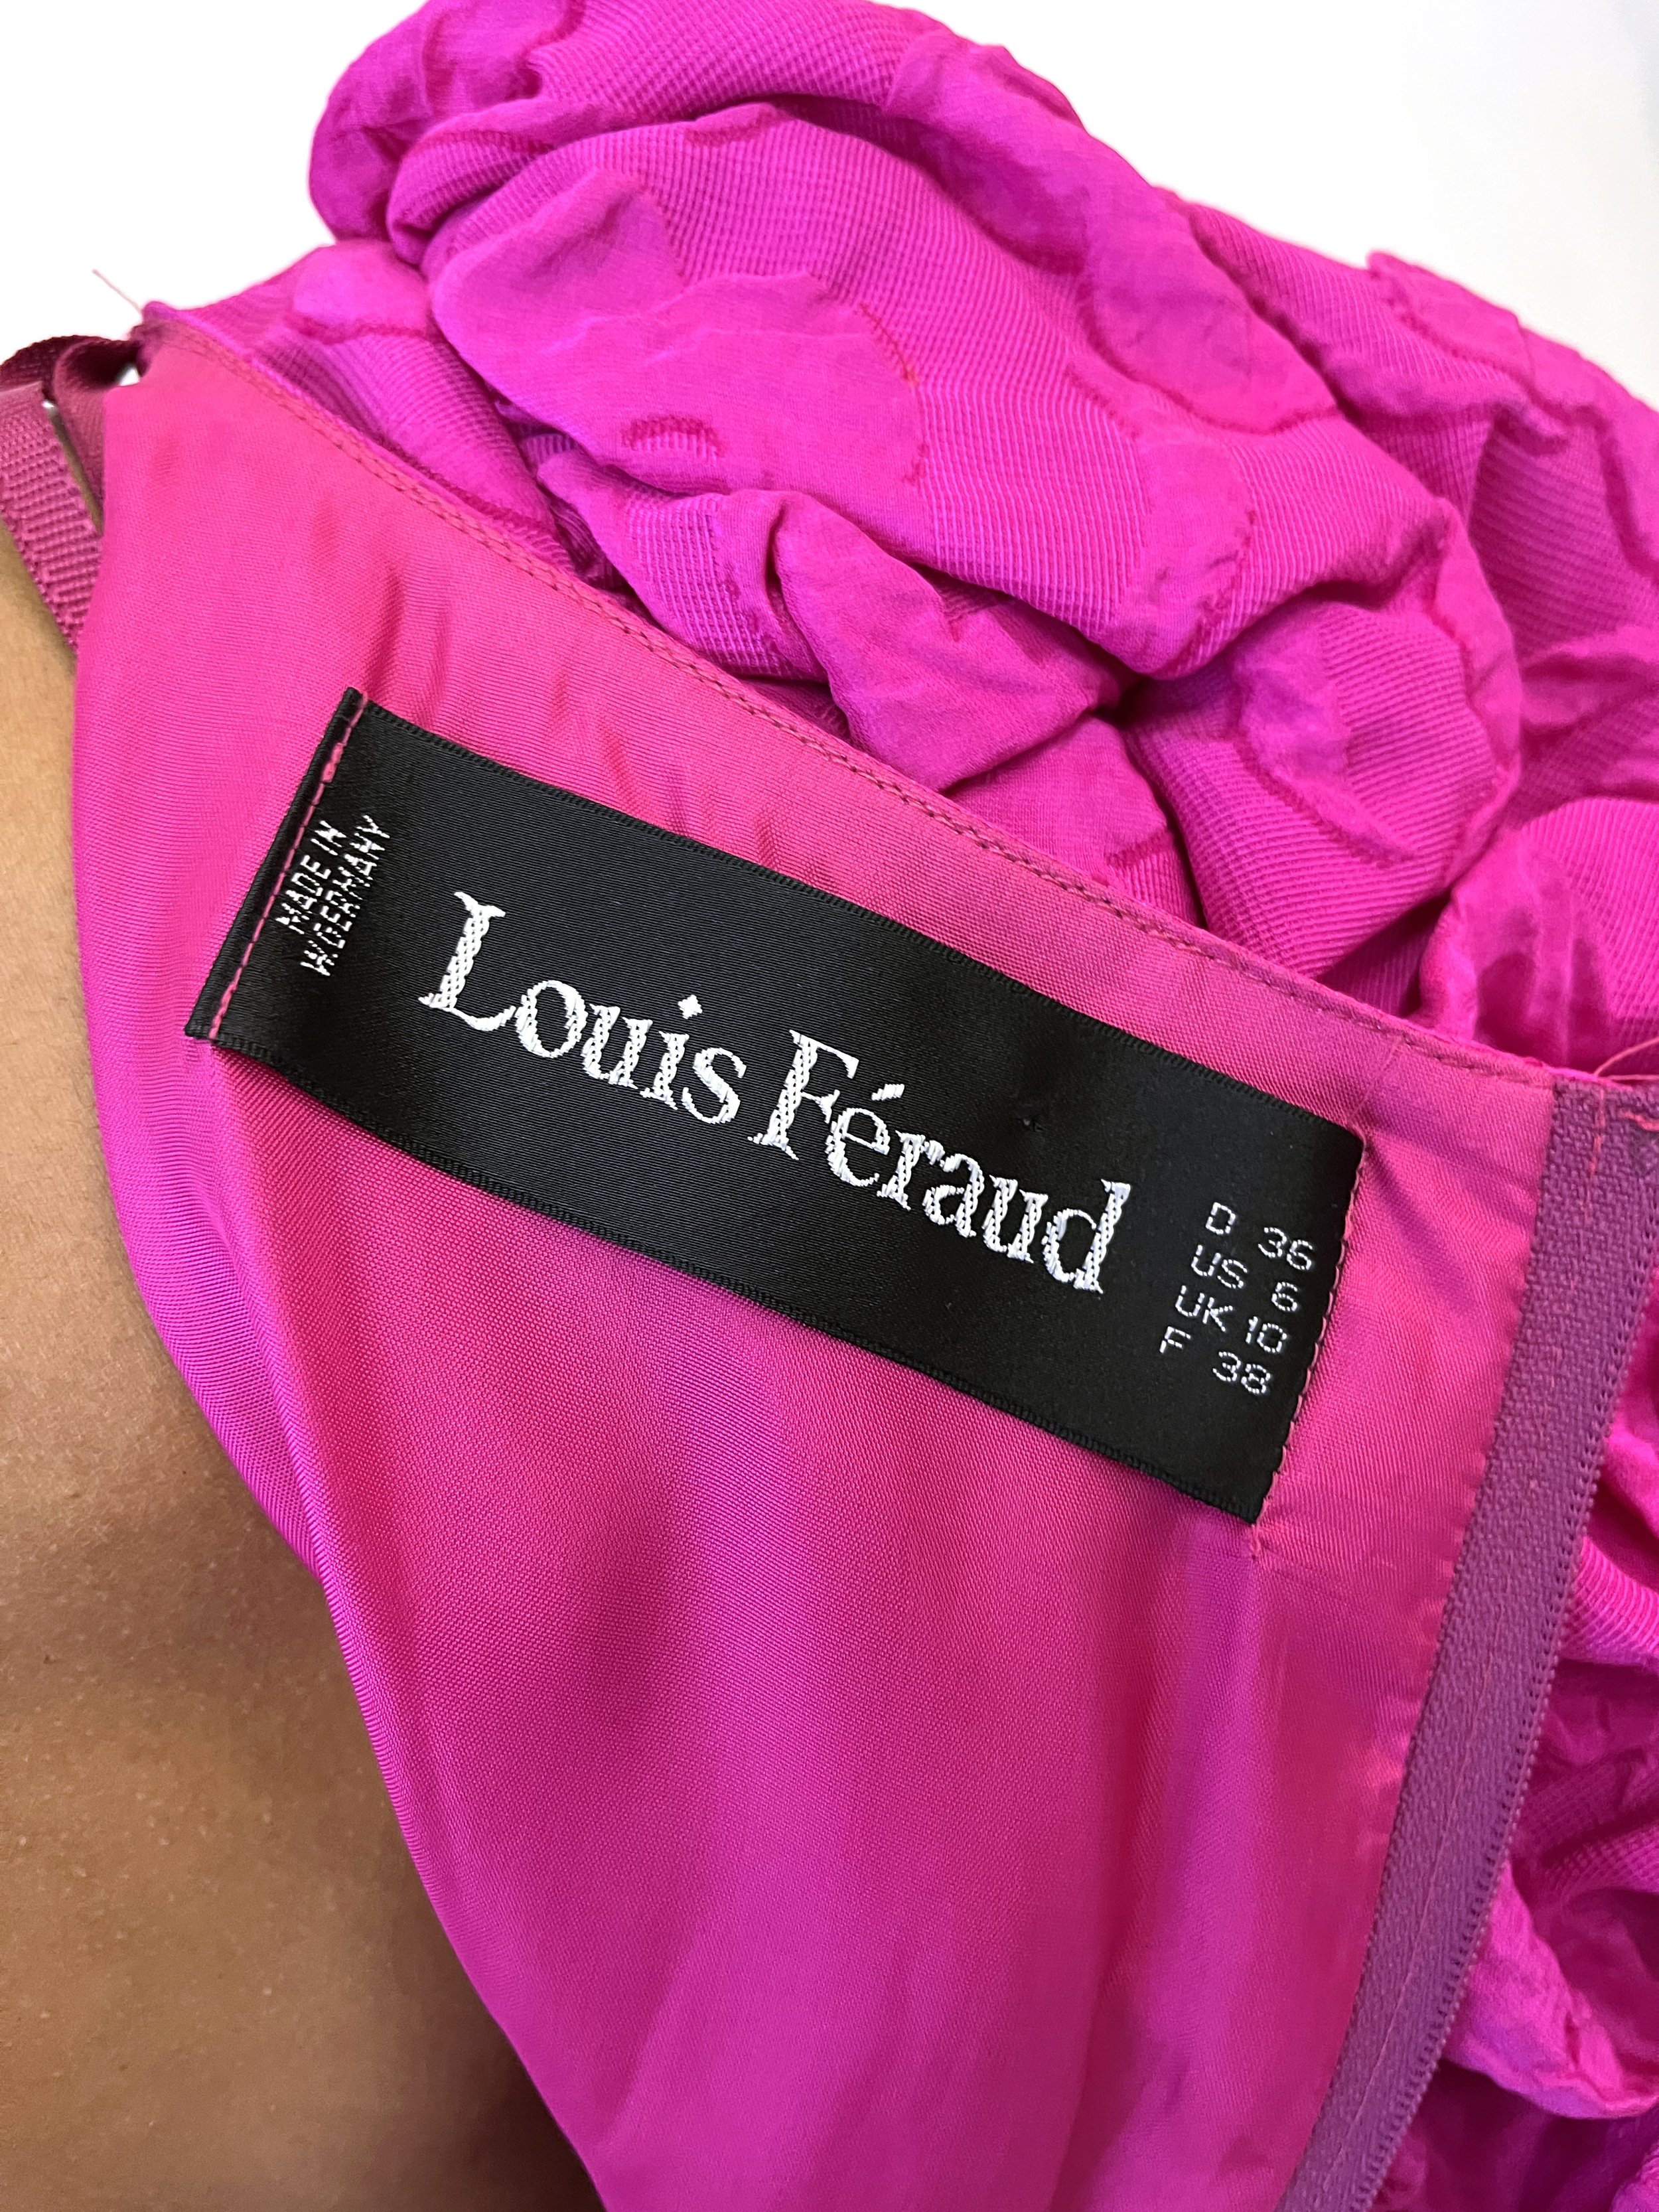 Louis Feraud - Authenticated Dress - Silk Pink Plain for Women, Never Worn, with Tag